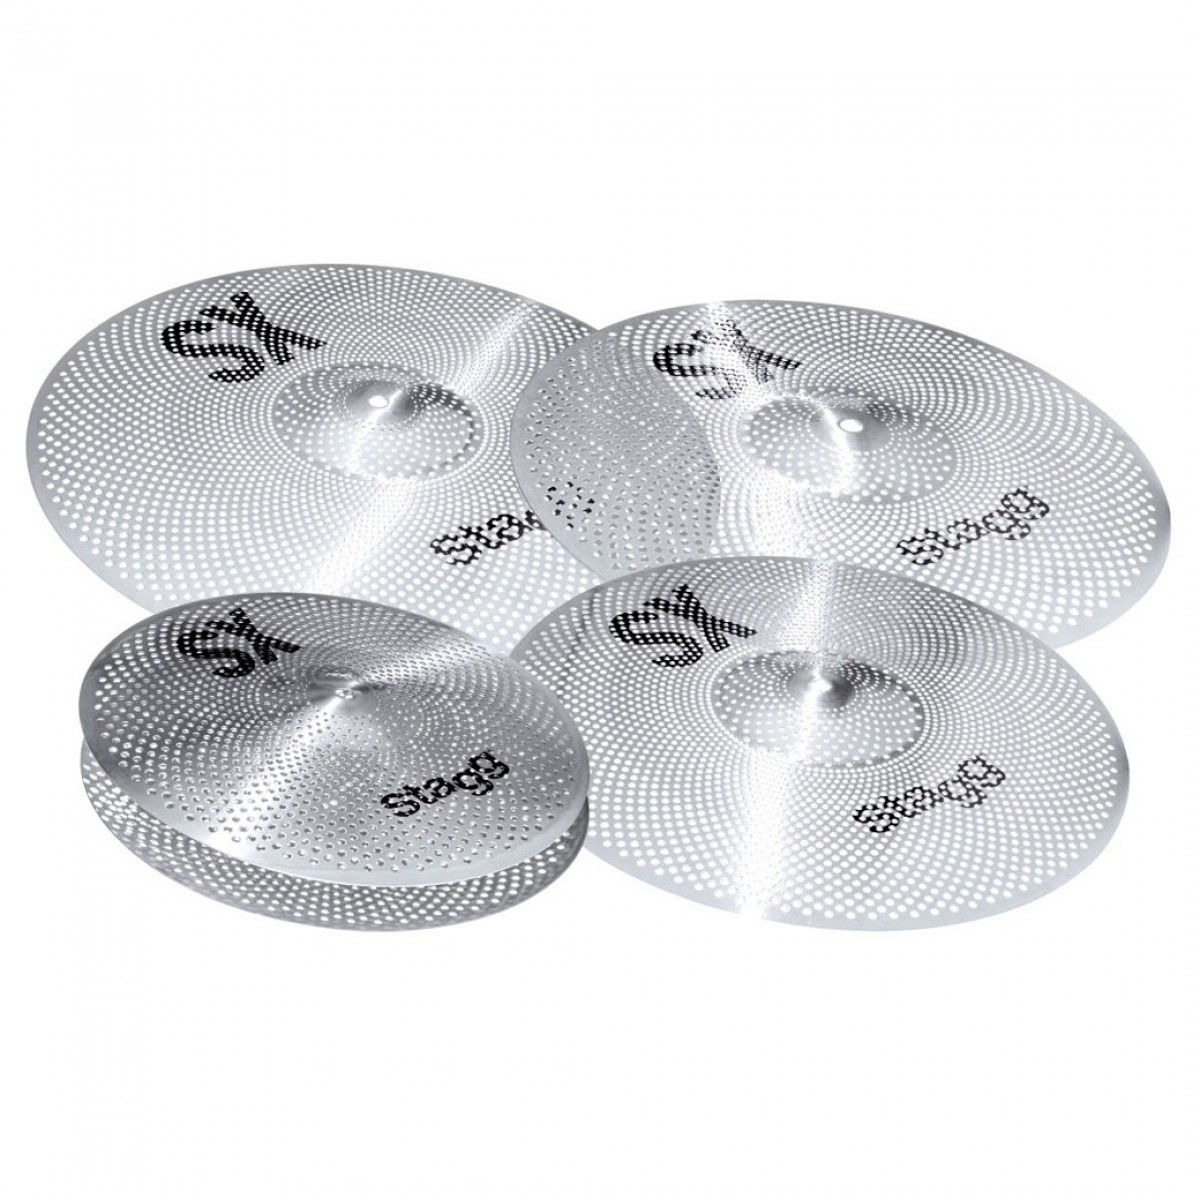 An image of Stagg Silent Practice Cymbal set w/bag | PMT Online